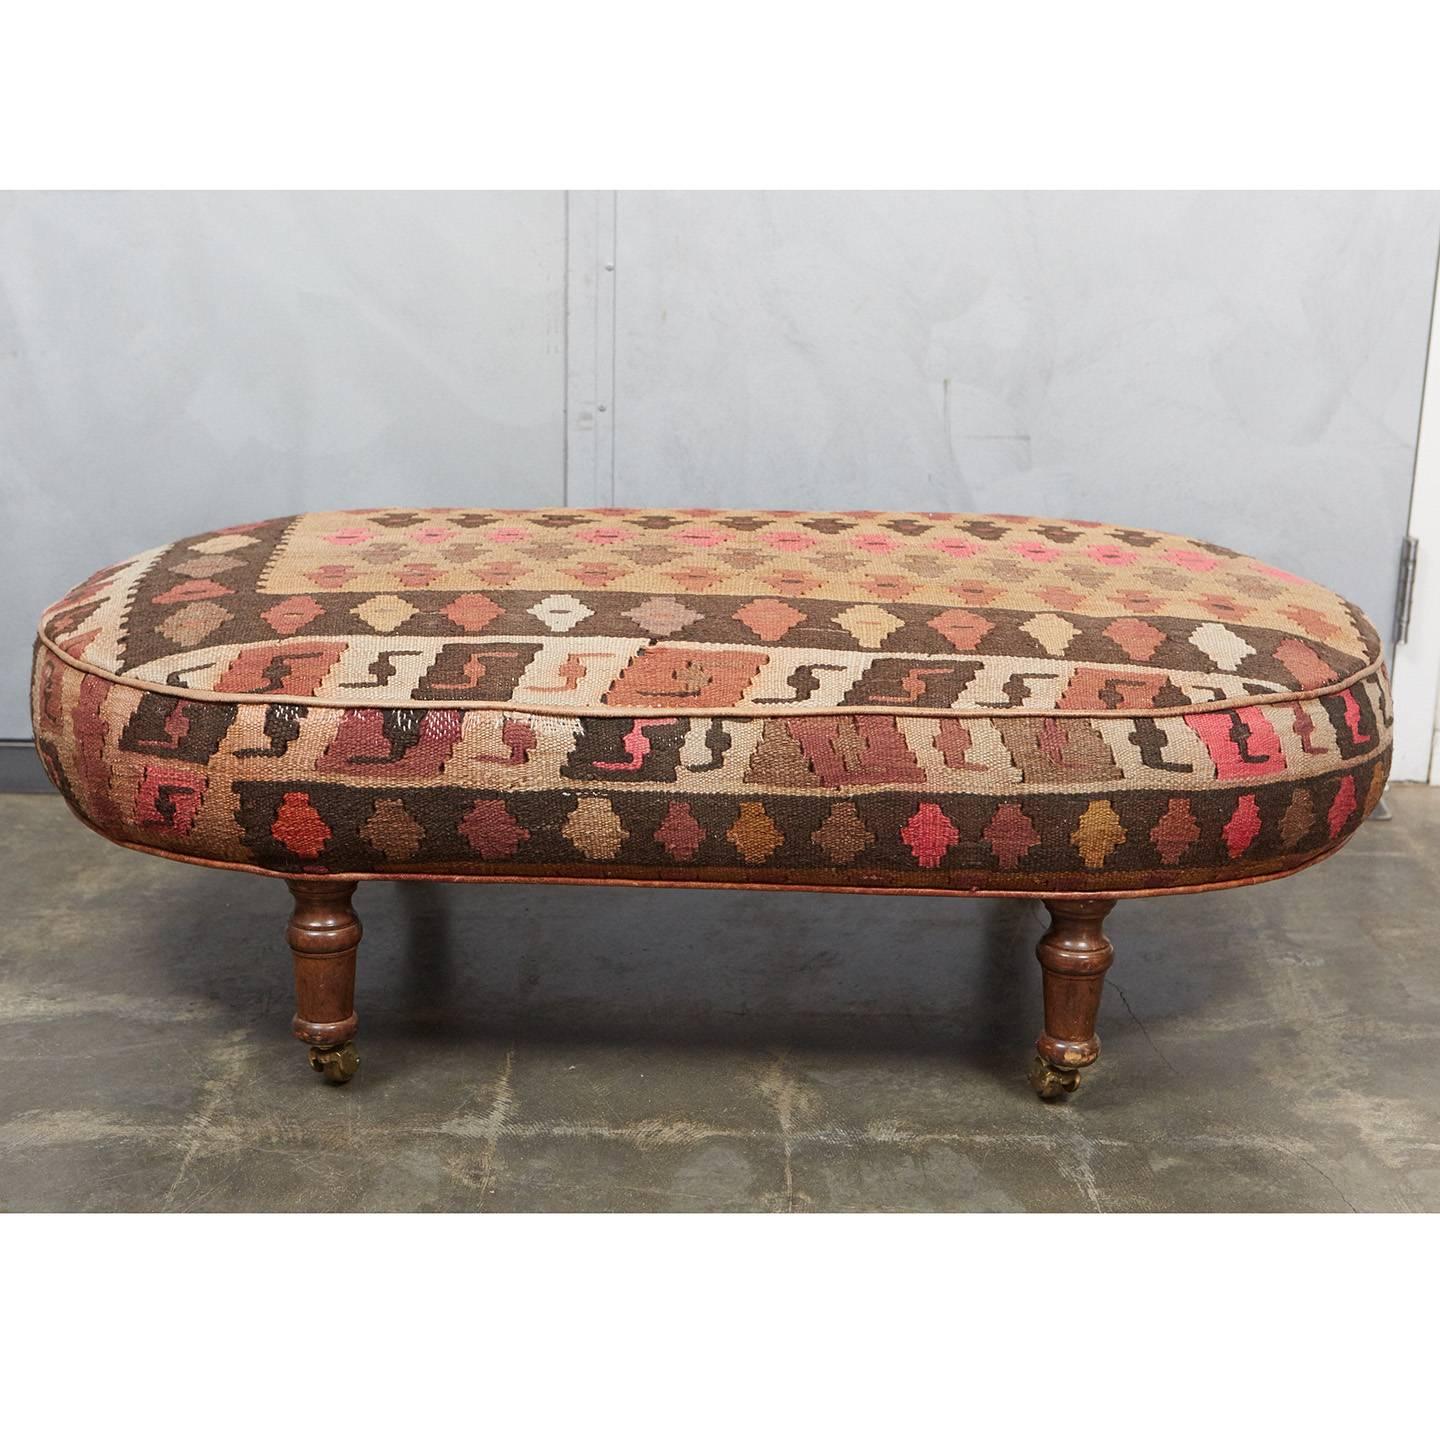 This interesting oval ottoman was custom-made in England in the 1980s. It has turned wood feet on casters and wheels. It is upholstered with a beautifully woven 1920s Kilim rug and trimmed with distressed leather piping. See photos for details of